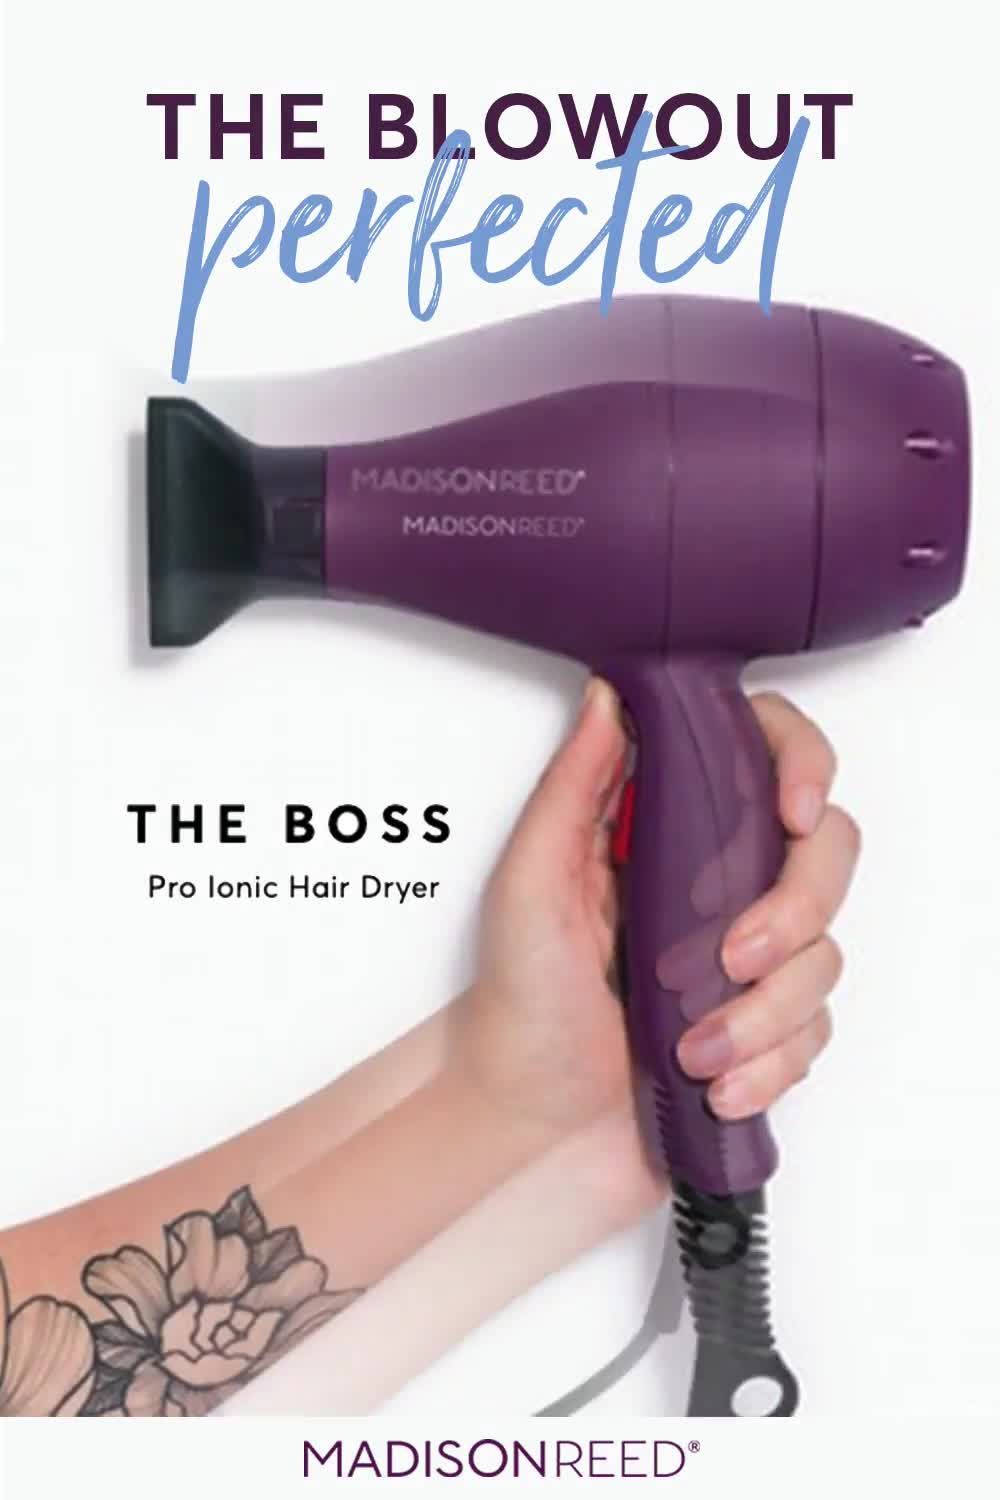 The Boss Pro Ionic Hair Dryer From Madison Reed - The Boss Pro Ionic Hair Dryer From Madison Reed -   16 style Hair messy ideas